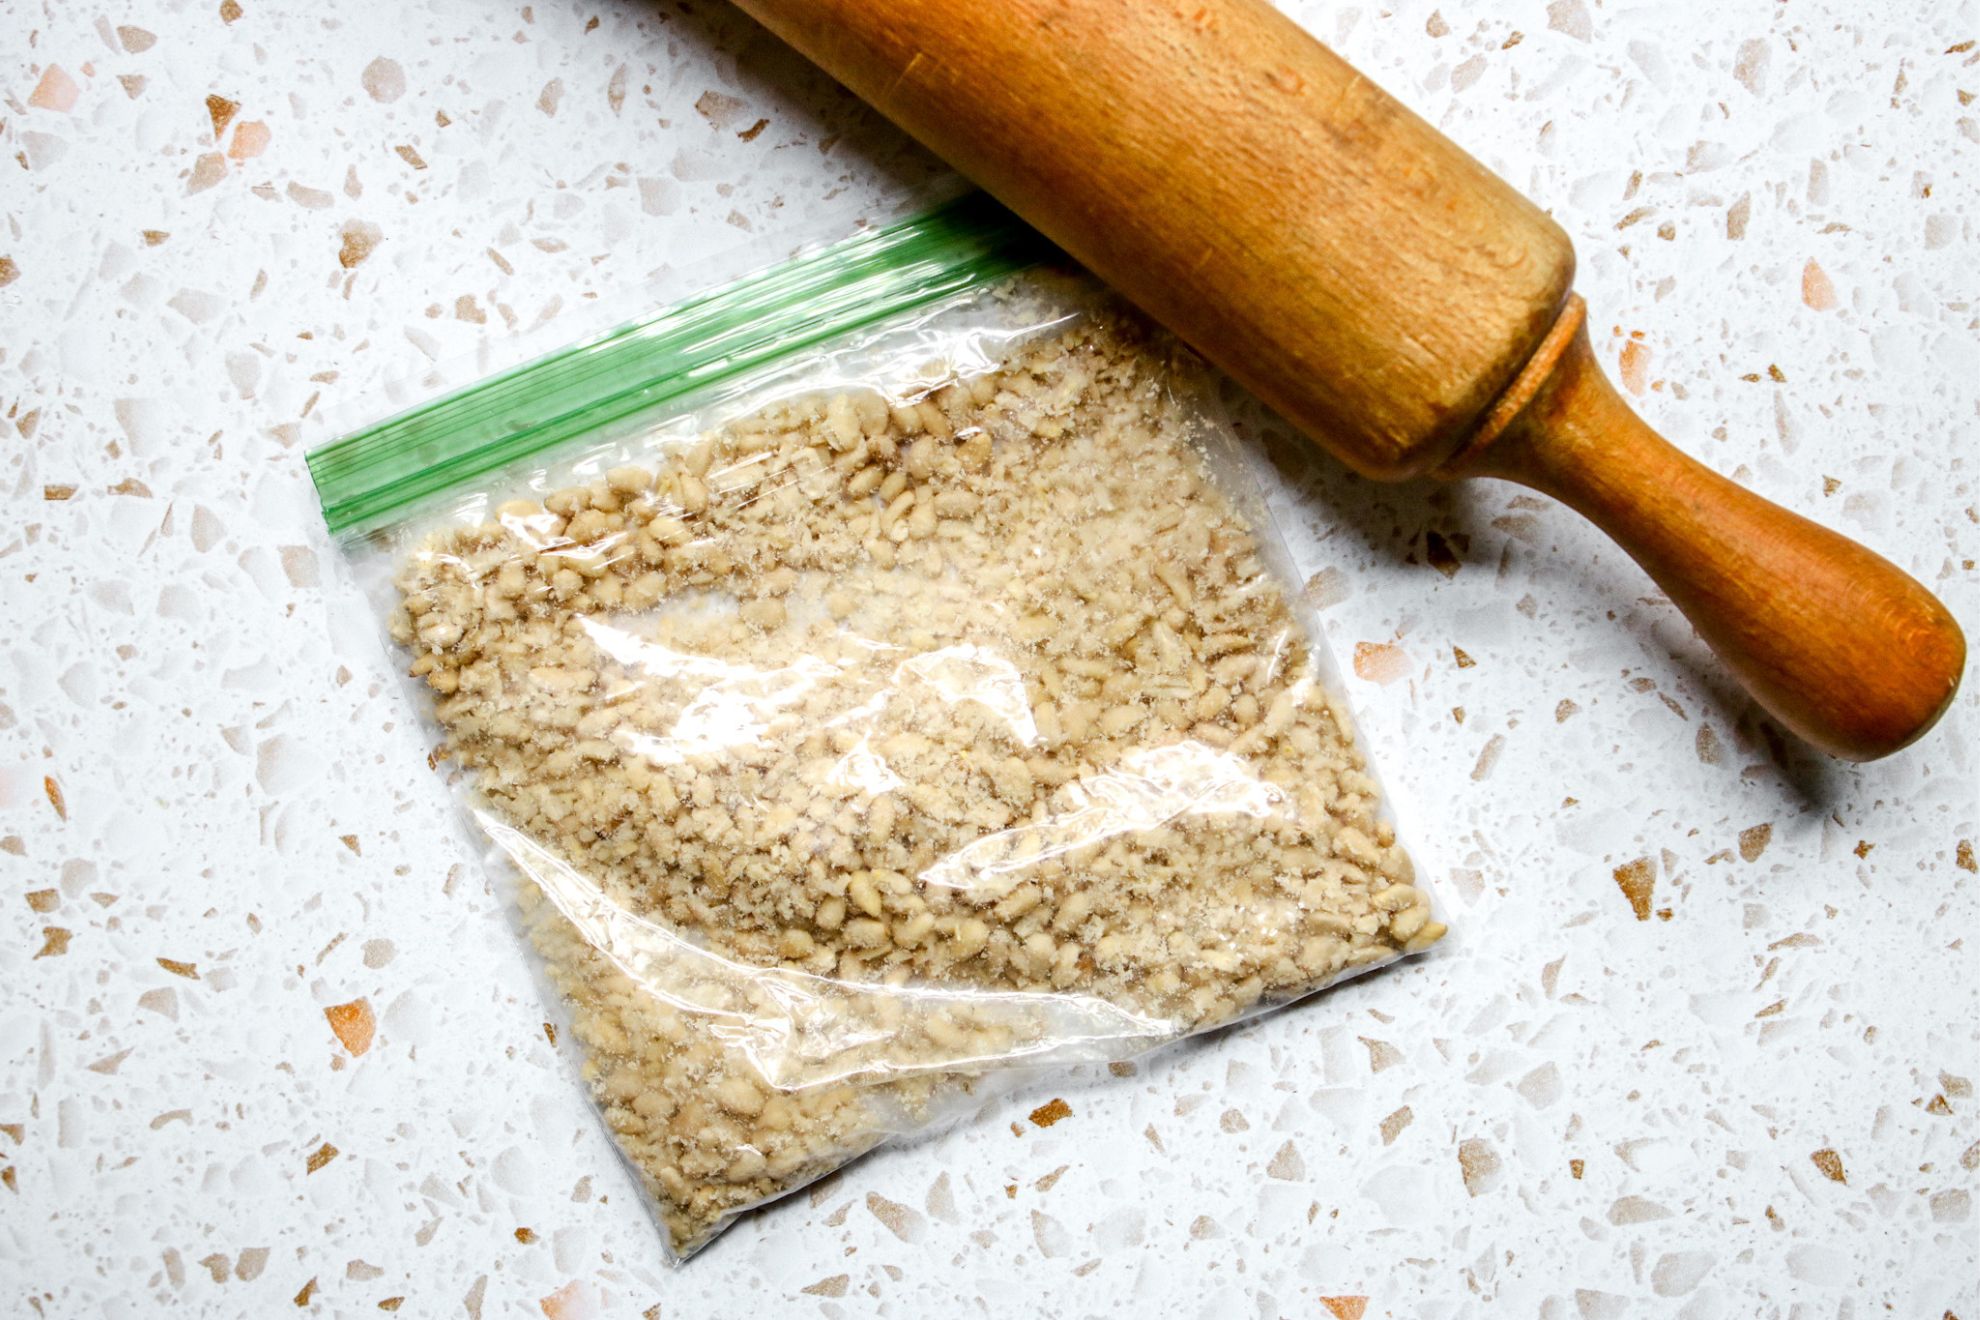 This is an overhead horizontal image of a small plastic baggie with crushed pine nuts in it. The baggie sits on a white terrazzo style counter. A rolling pin is on the counter above the baggie.